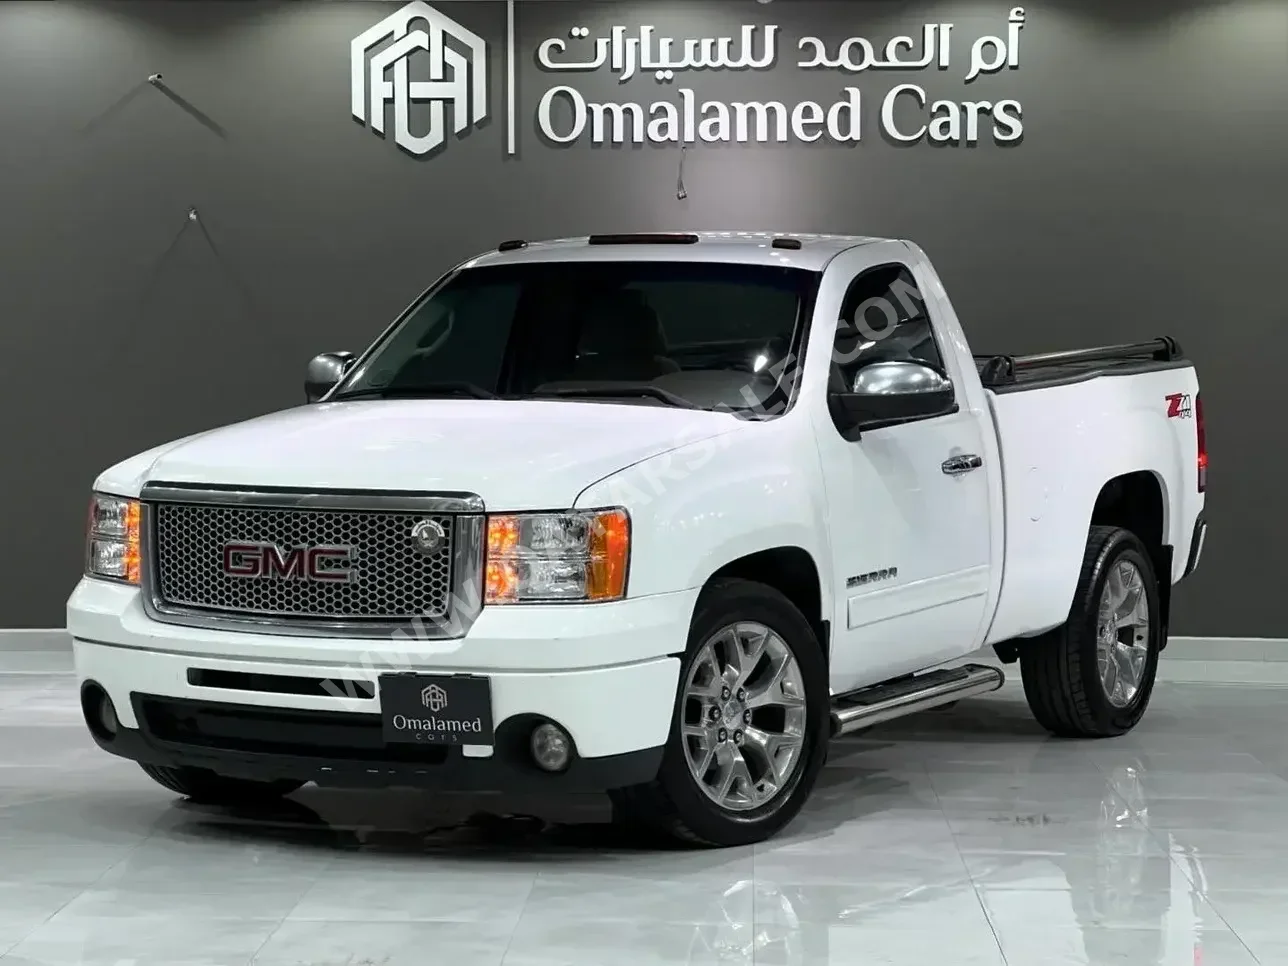 GMC  Sierra  1500  2012  Automatic  235,000 Km  8 Cylinder  Four Wheel Drive (4WD)  Pick Up  White